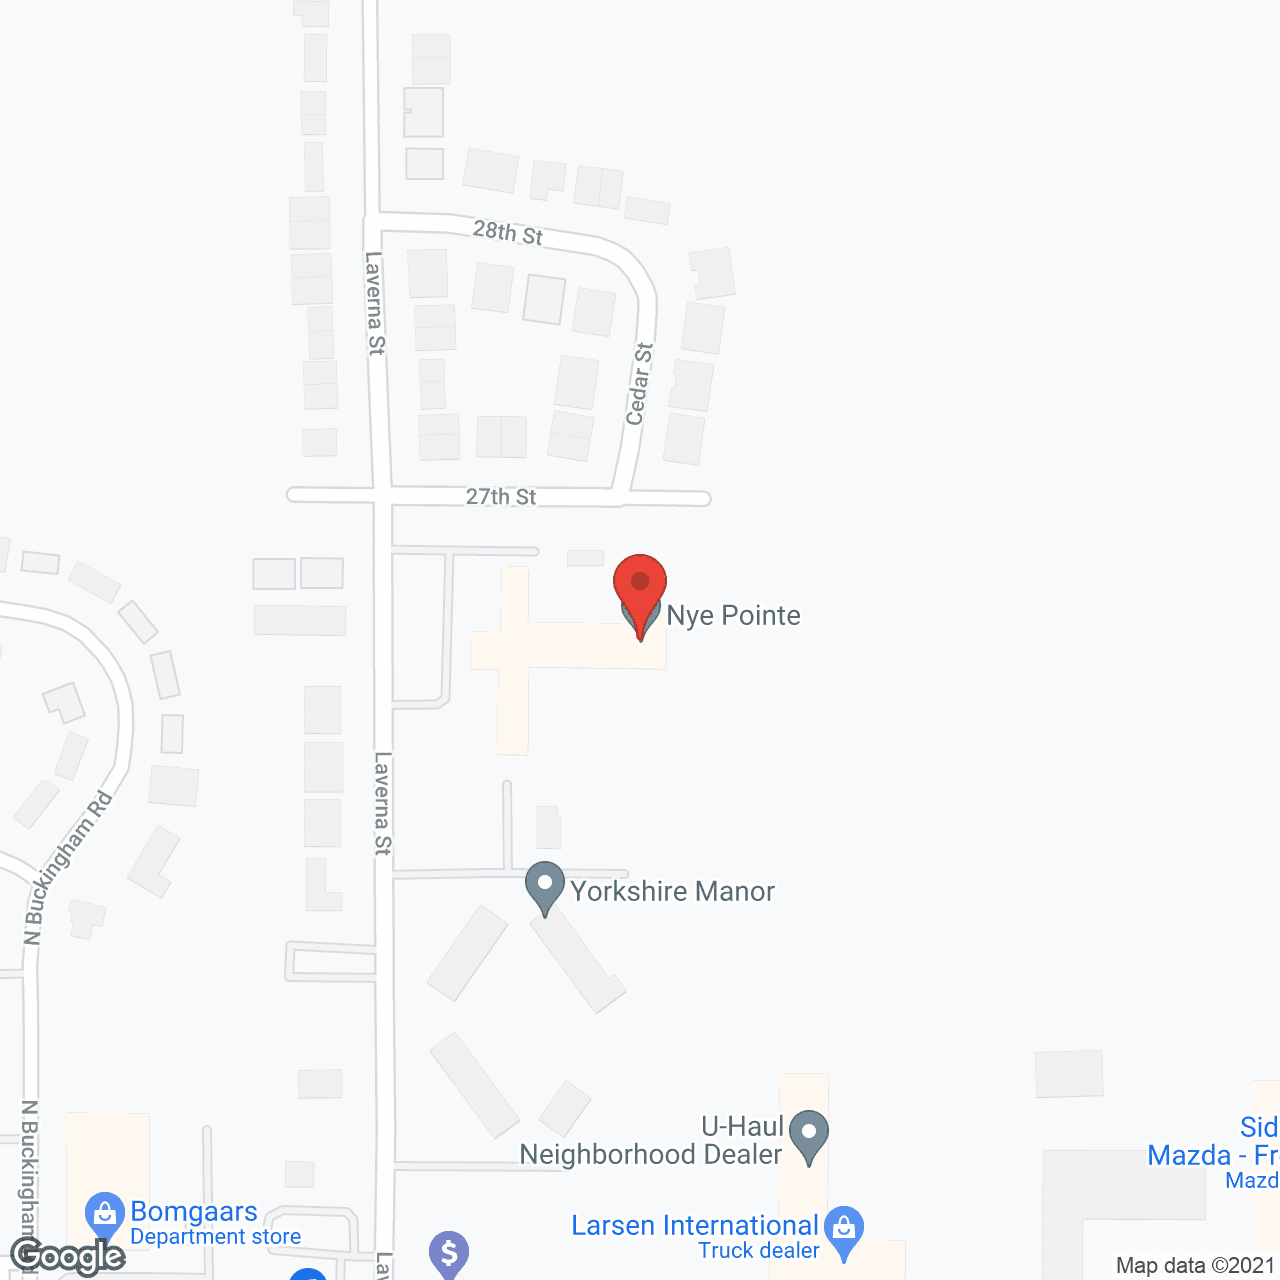 Nye Pointe in google map